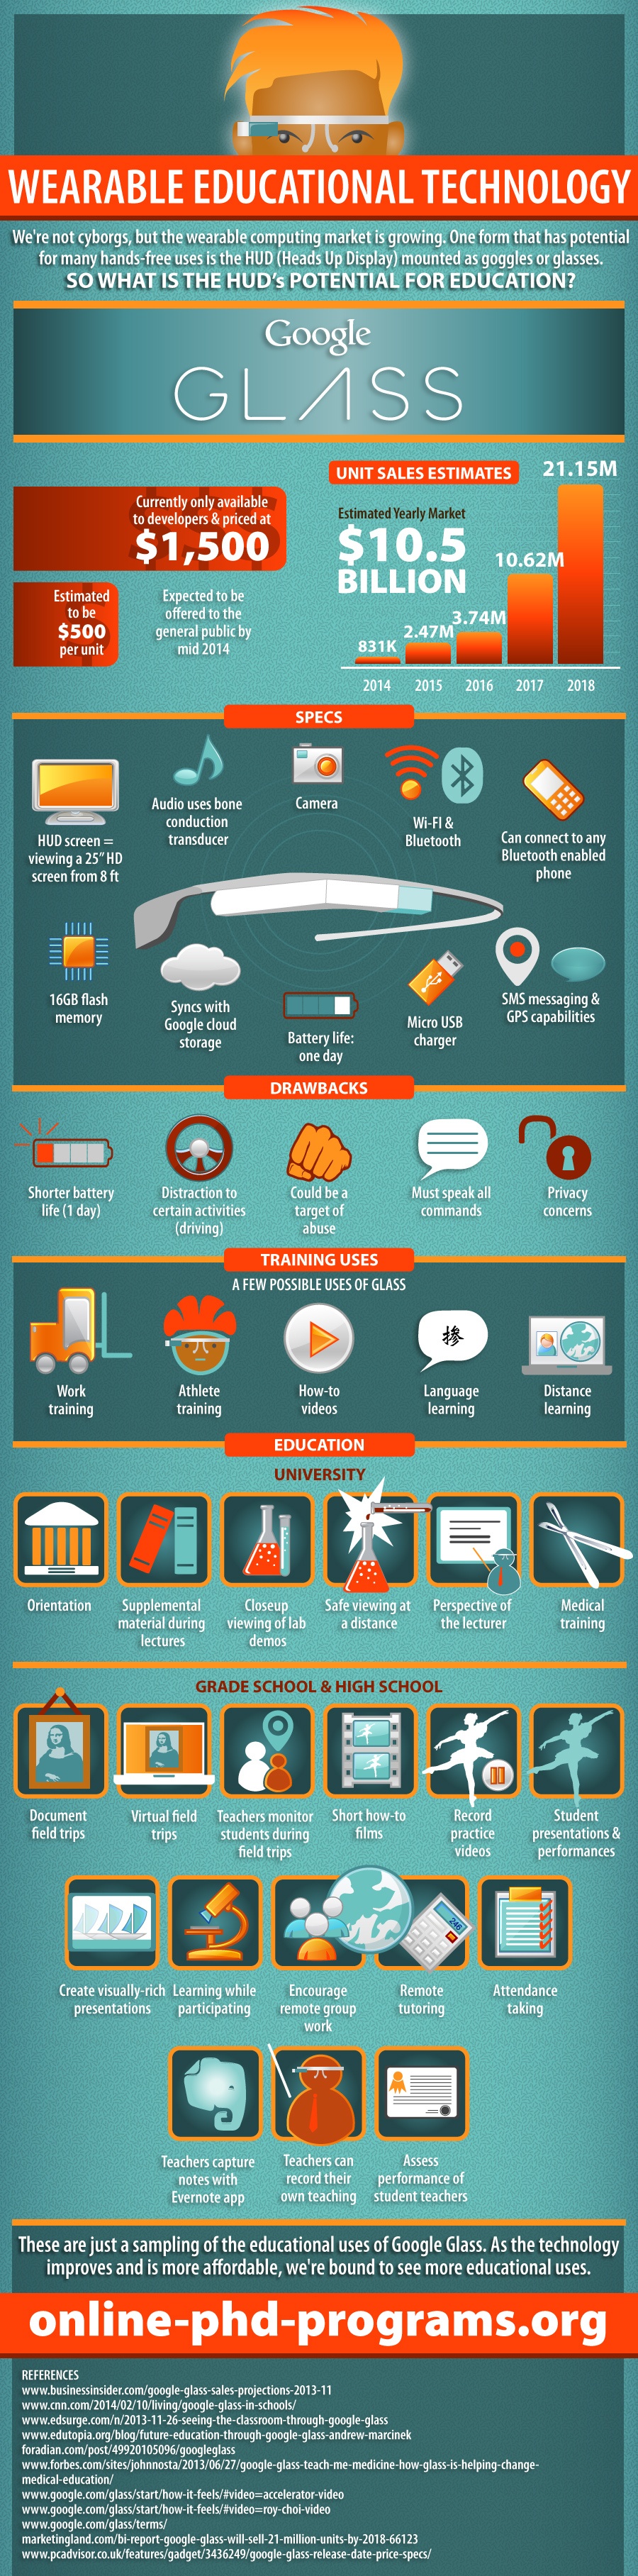 Wearable-Educational-Technology-Infographic